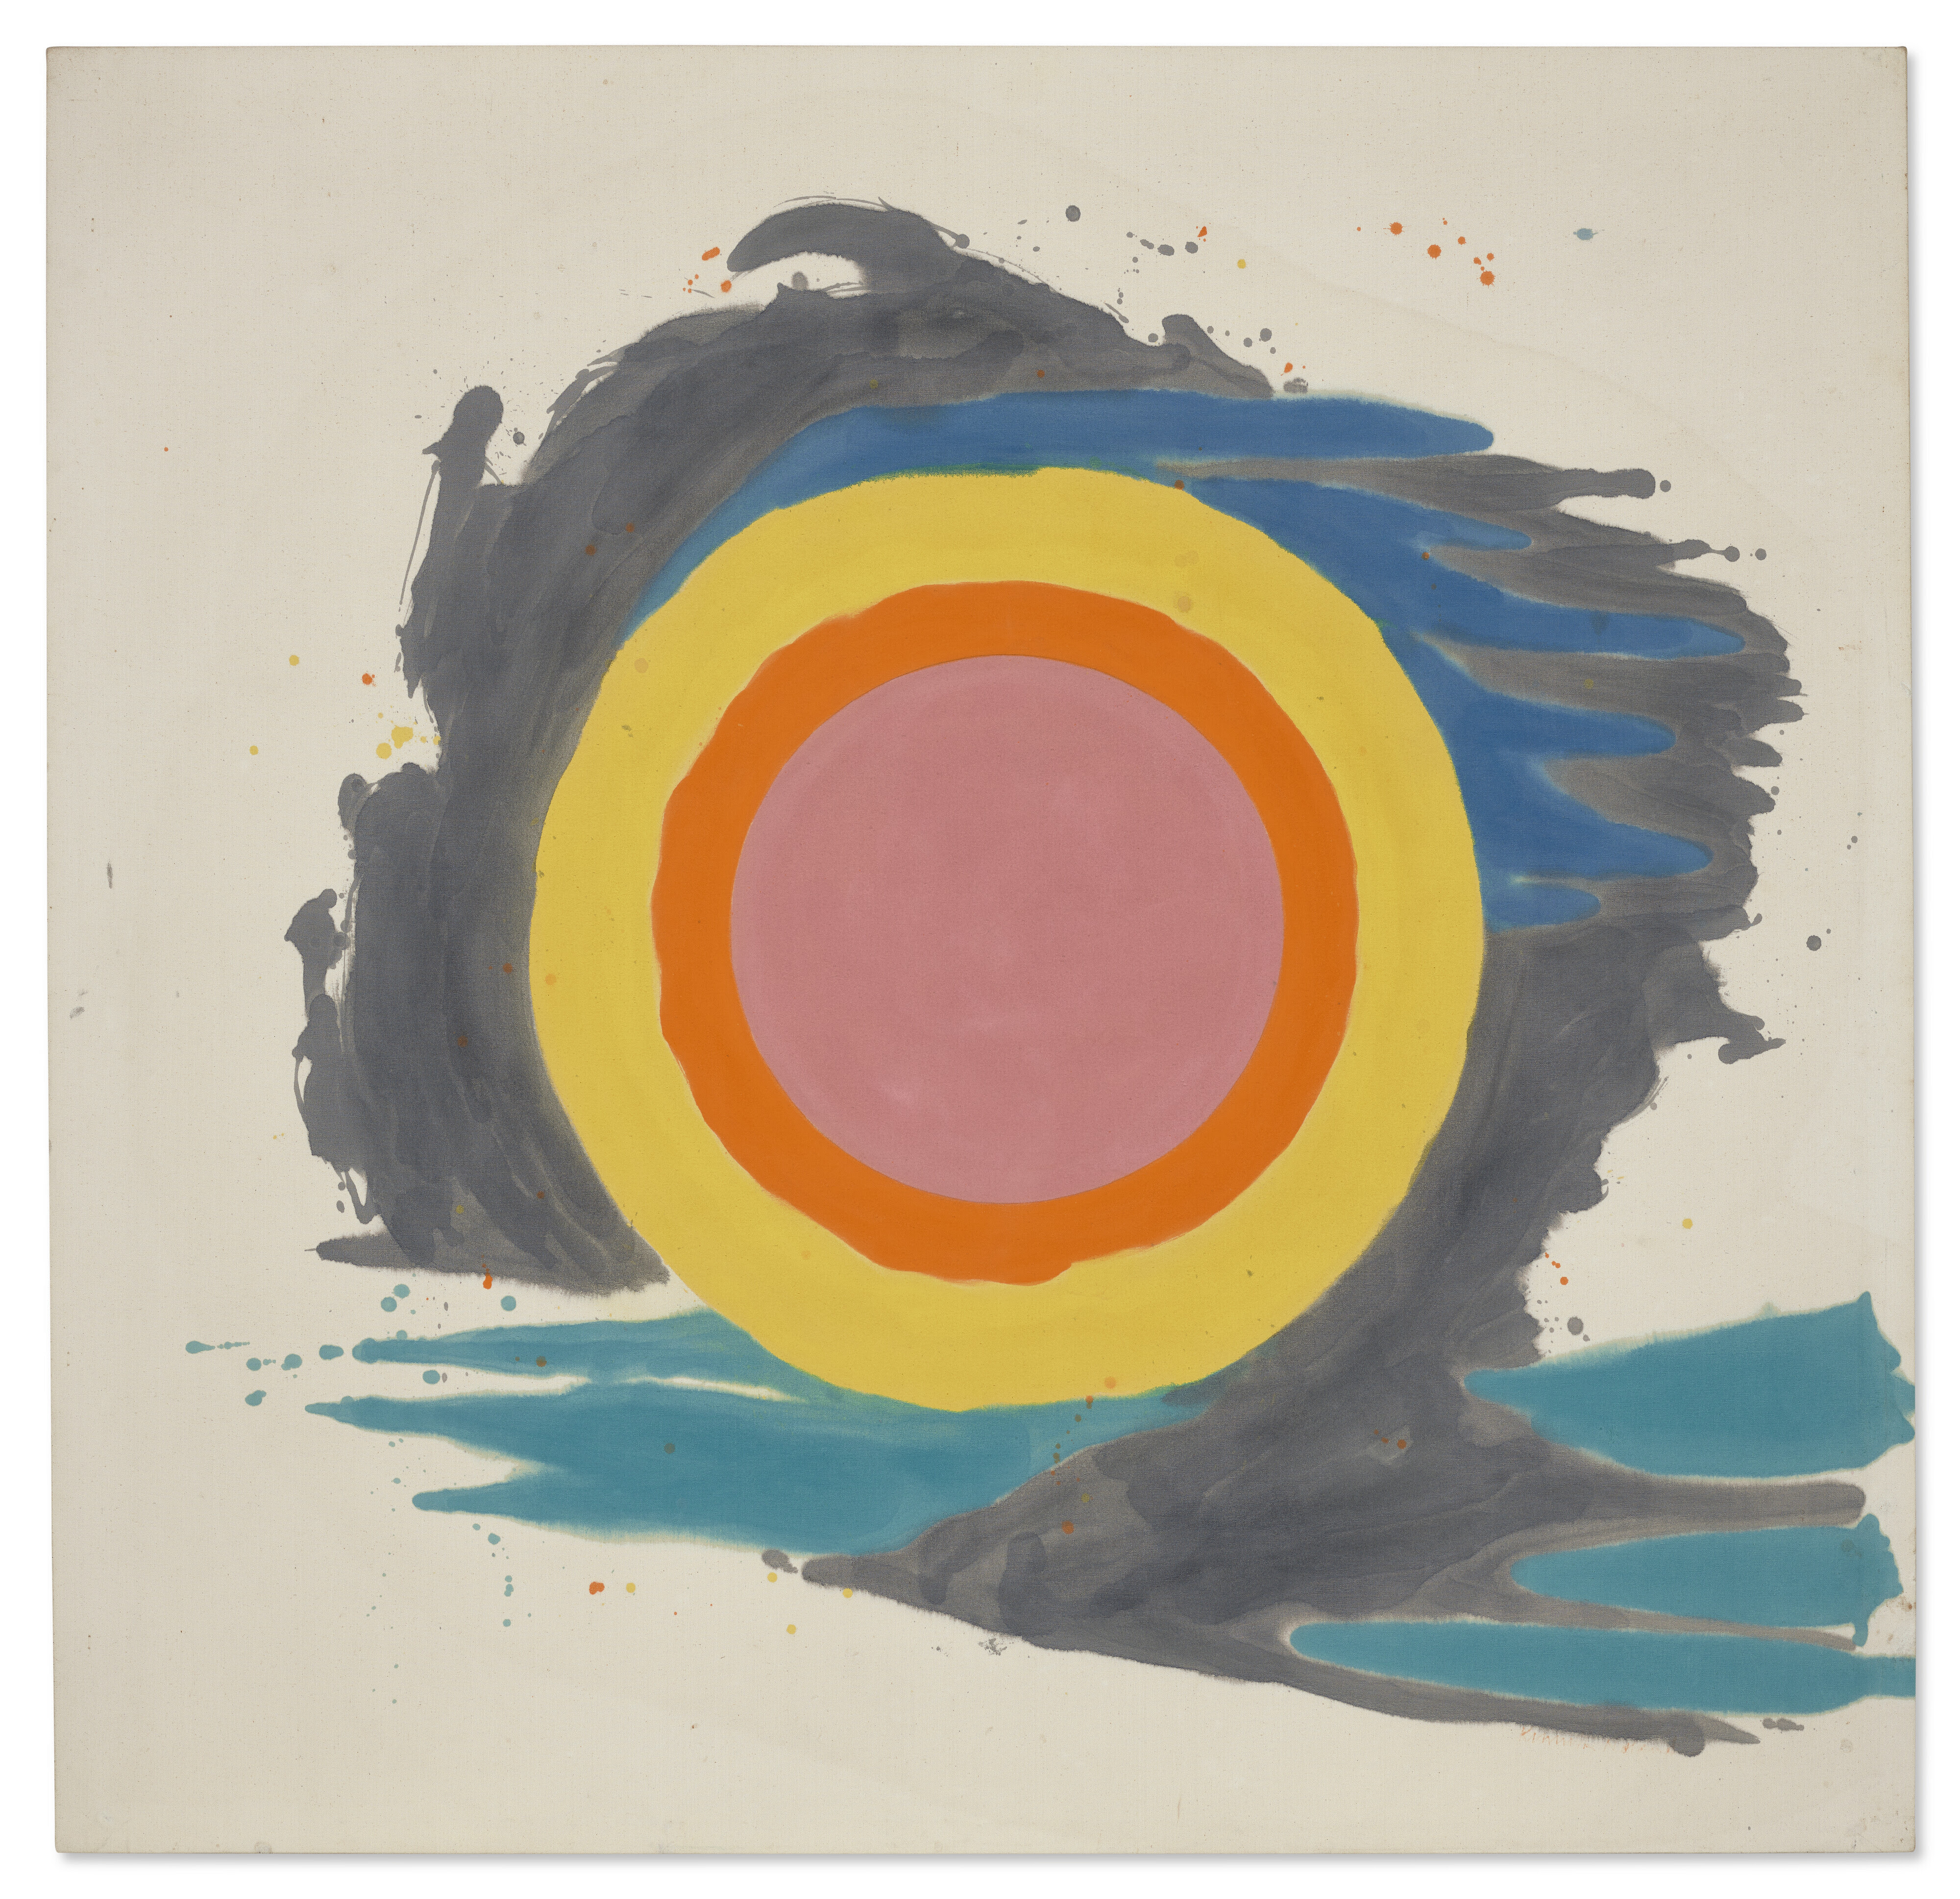 Kenneth Noland (1924–2010) Lunar Episode acrylic on canvas 68 x 70 in. (172.7 x 177.8 cm.) Painted in 1959. Estimate: $3,000,000-5,000,000